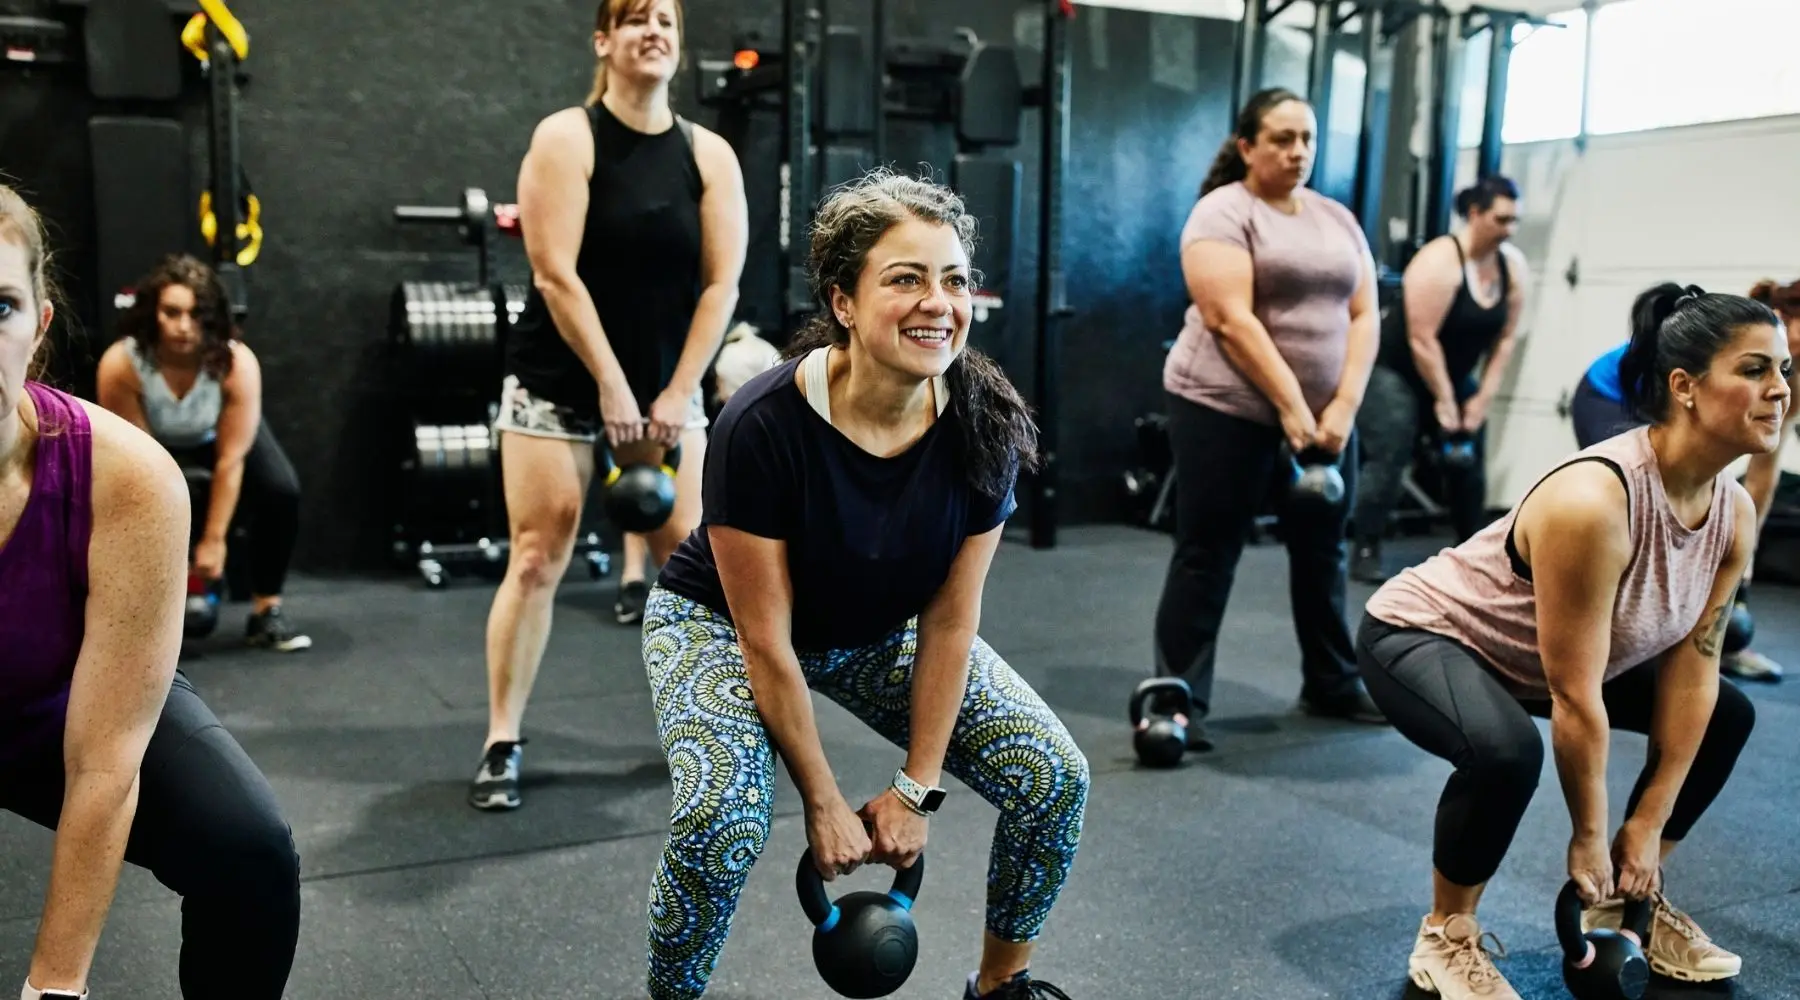 Smiling woman doing kettlebell swings while working out during class in gym.